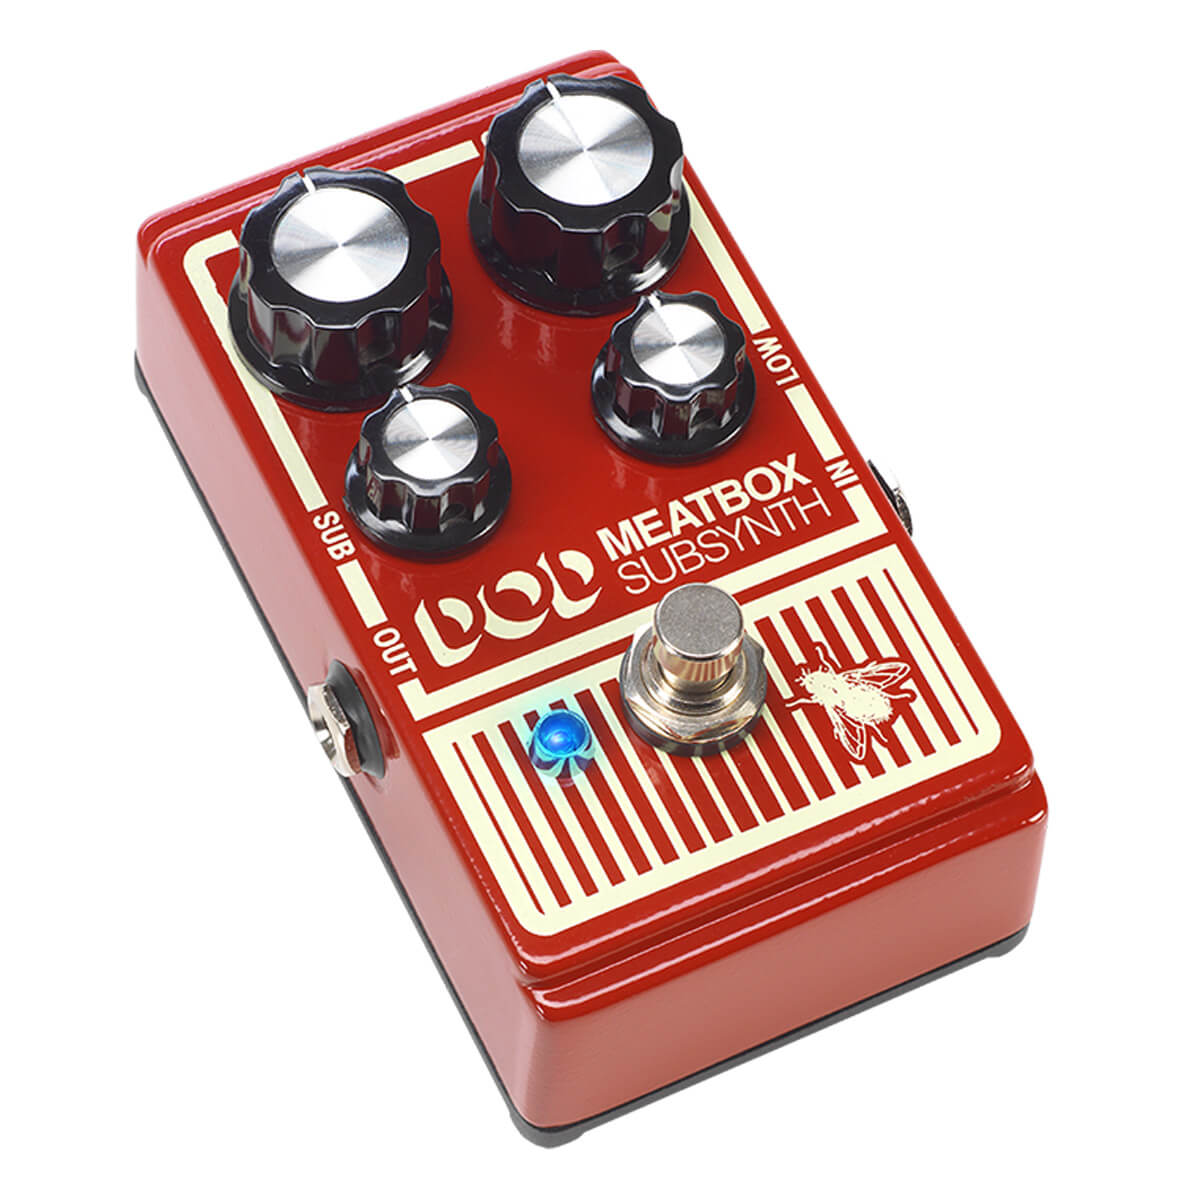 Dod Meatbox Bass Subharmonic Synthesizer Pedal And Low-End Enhancer